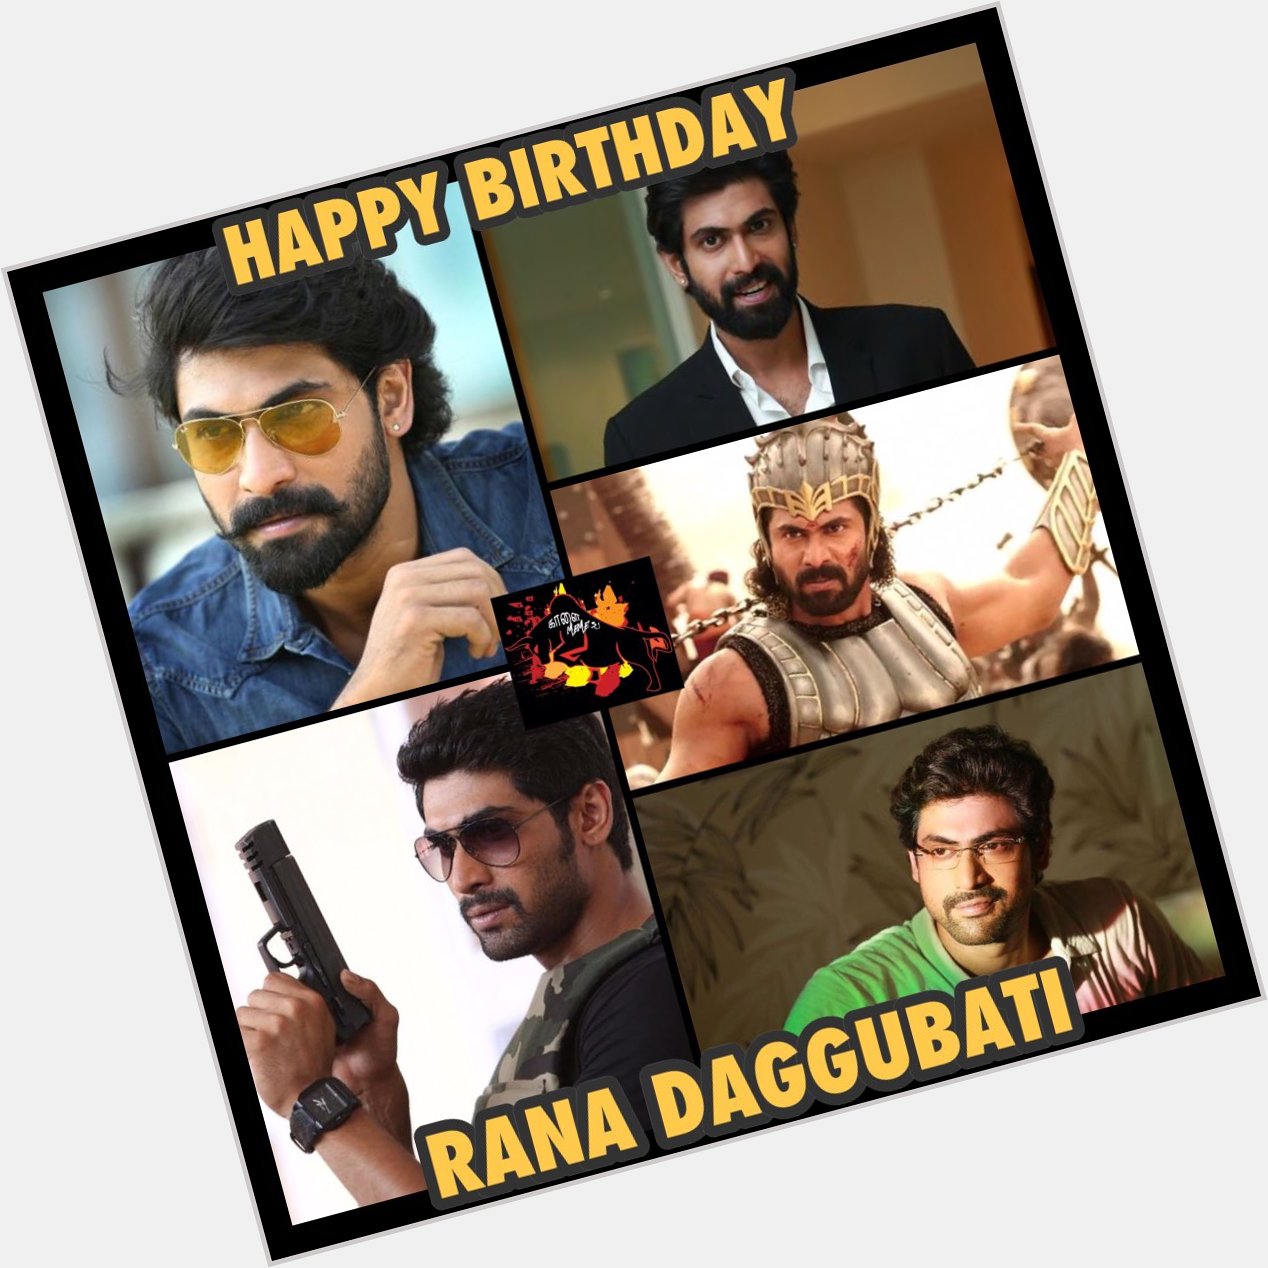 Happy Birthday Rana Daggubati   All the best for your future projects sir    